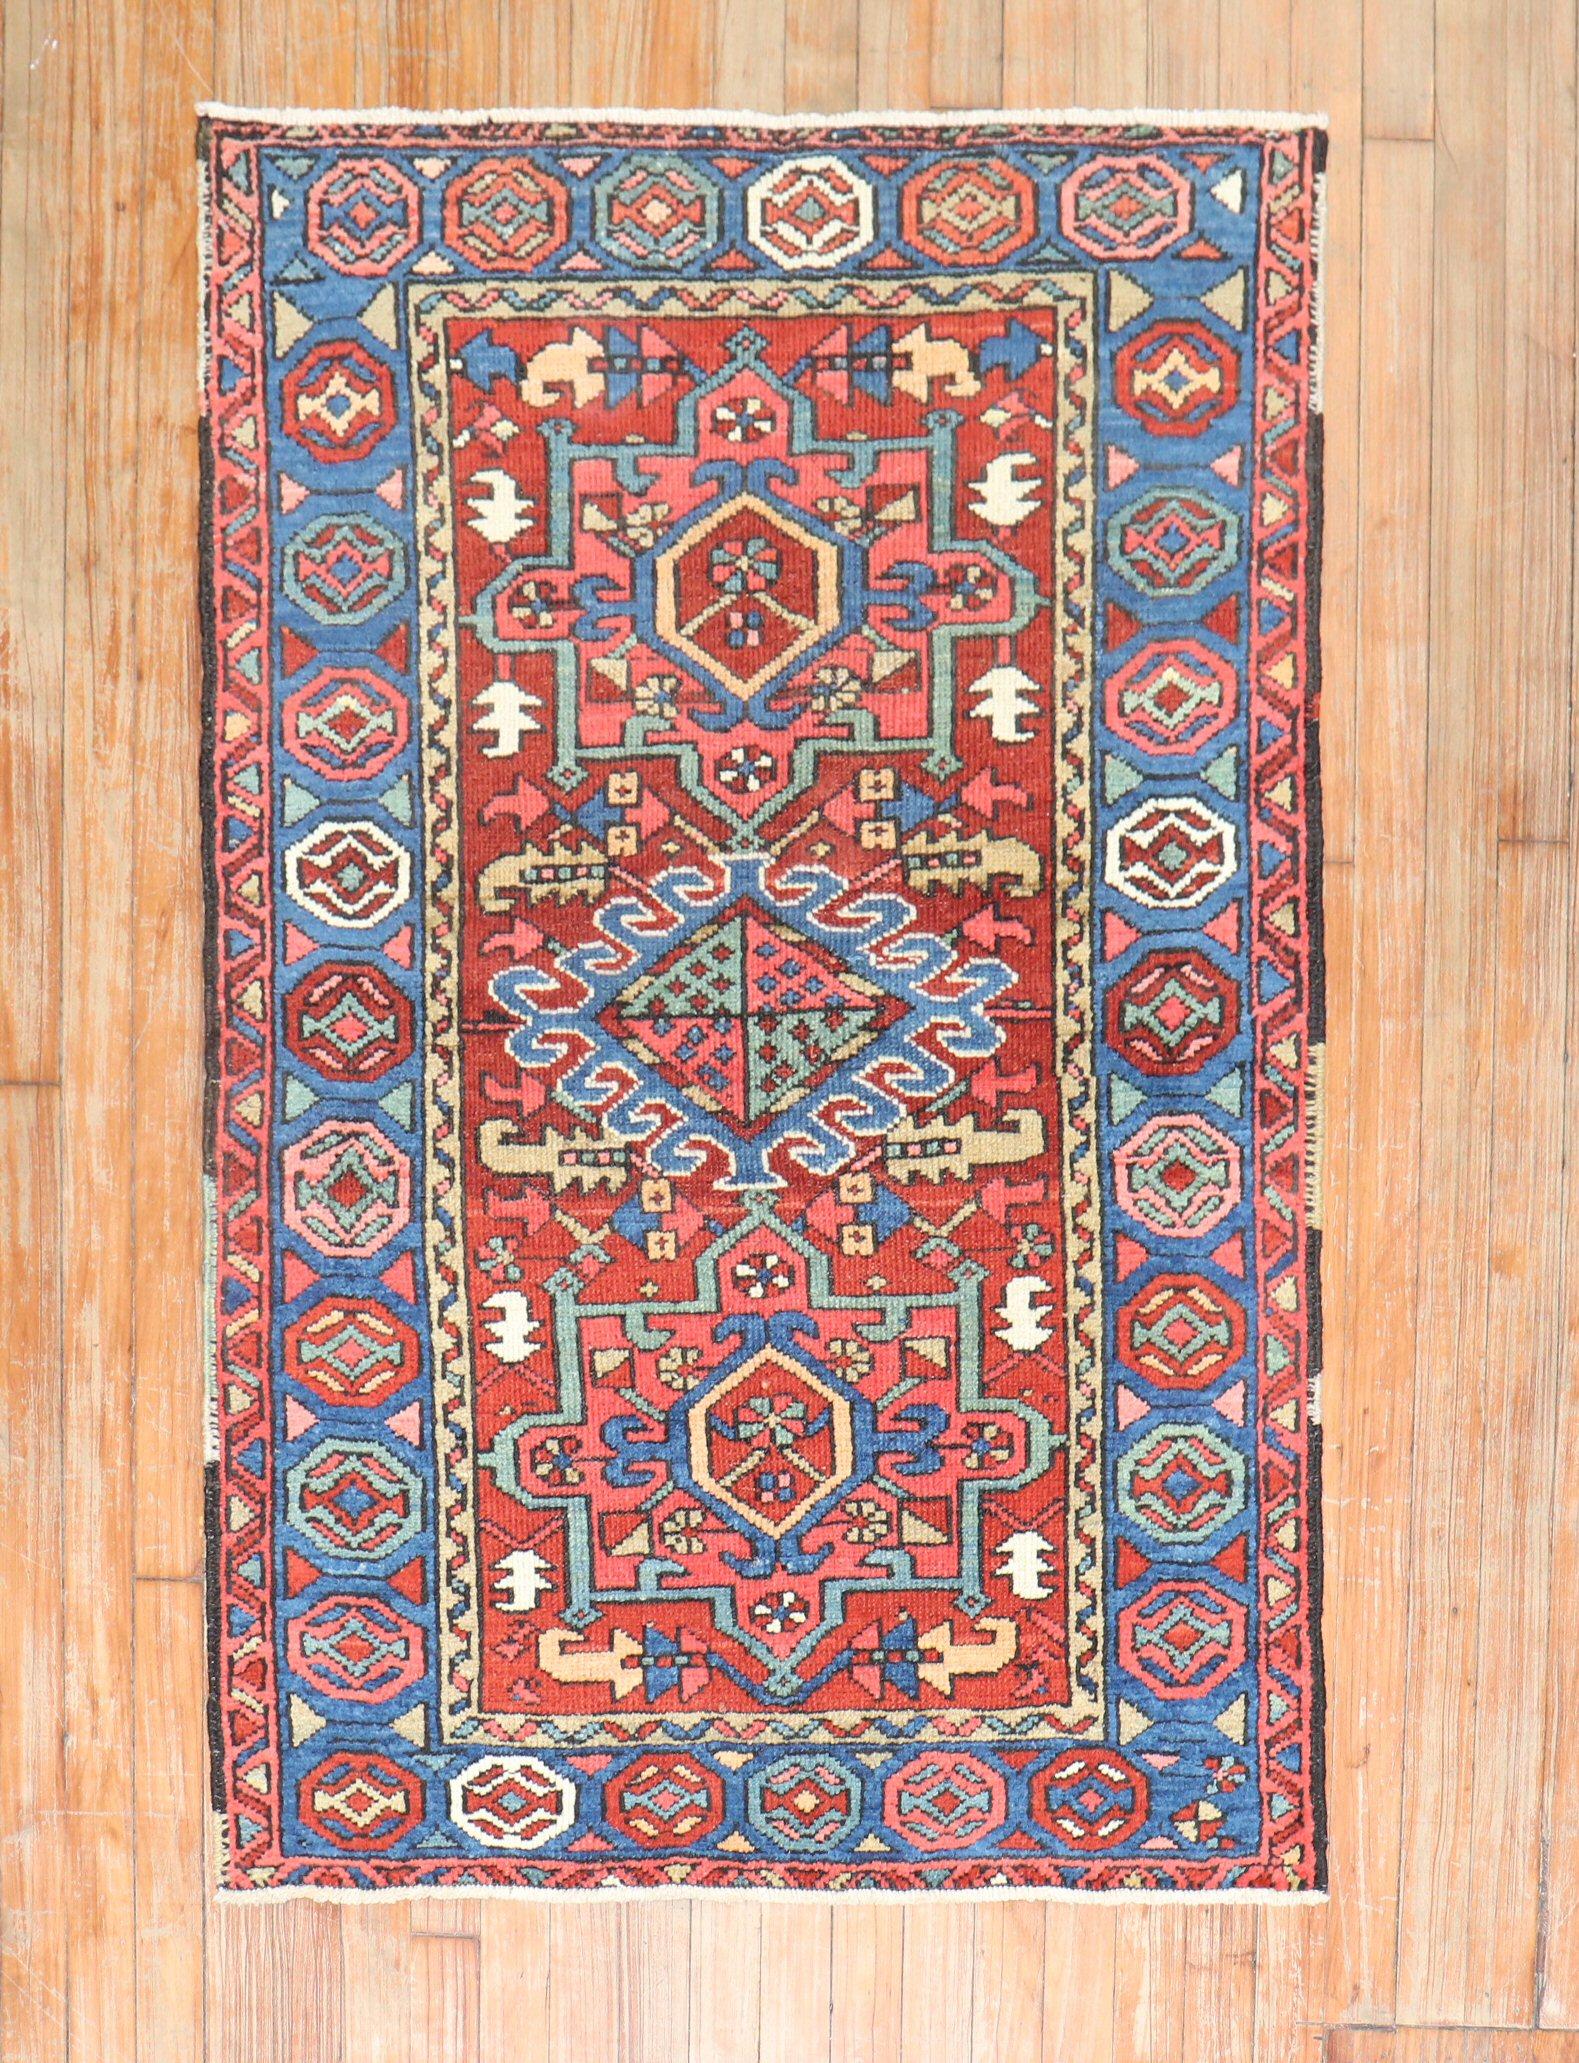 An early 20th-century Persian Heriz karadja small rug with cheerful colors

Measures: 2'11'' x 4'4''.